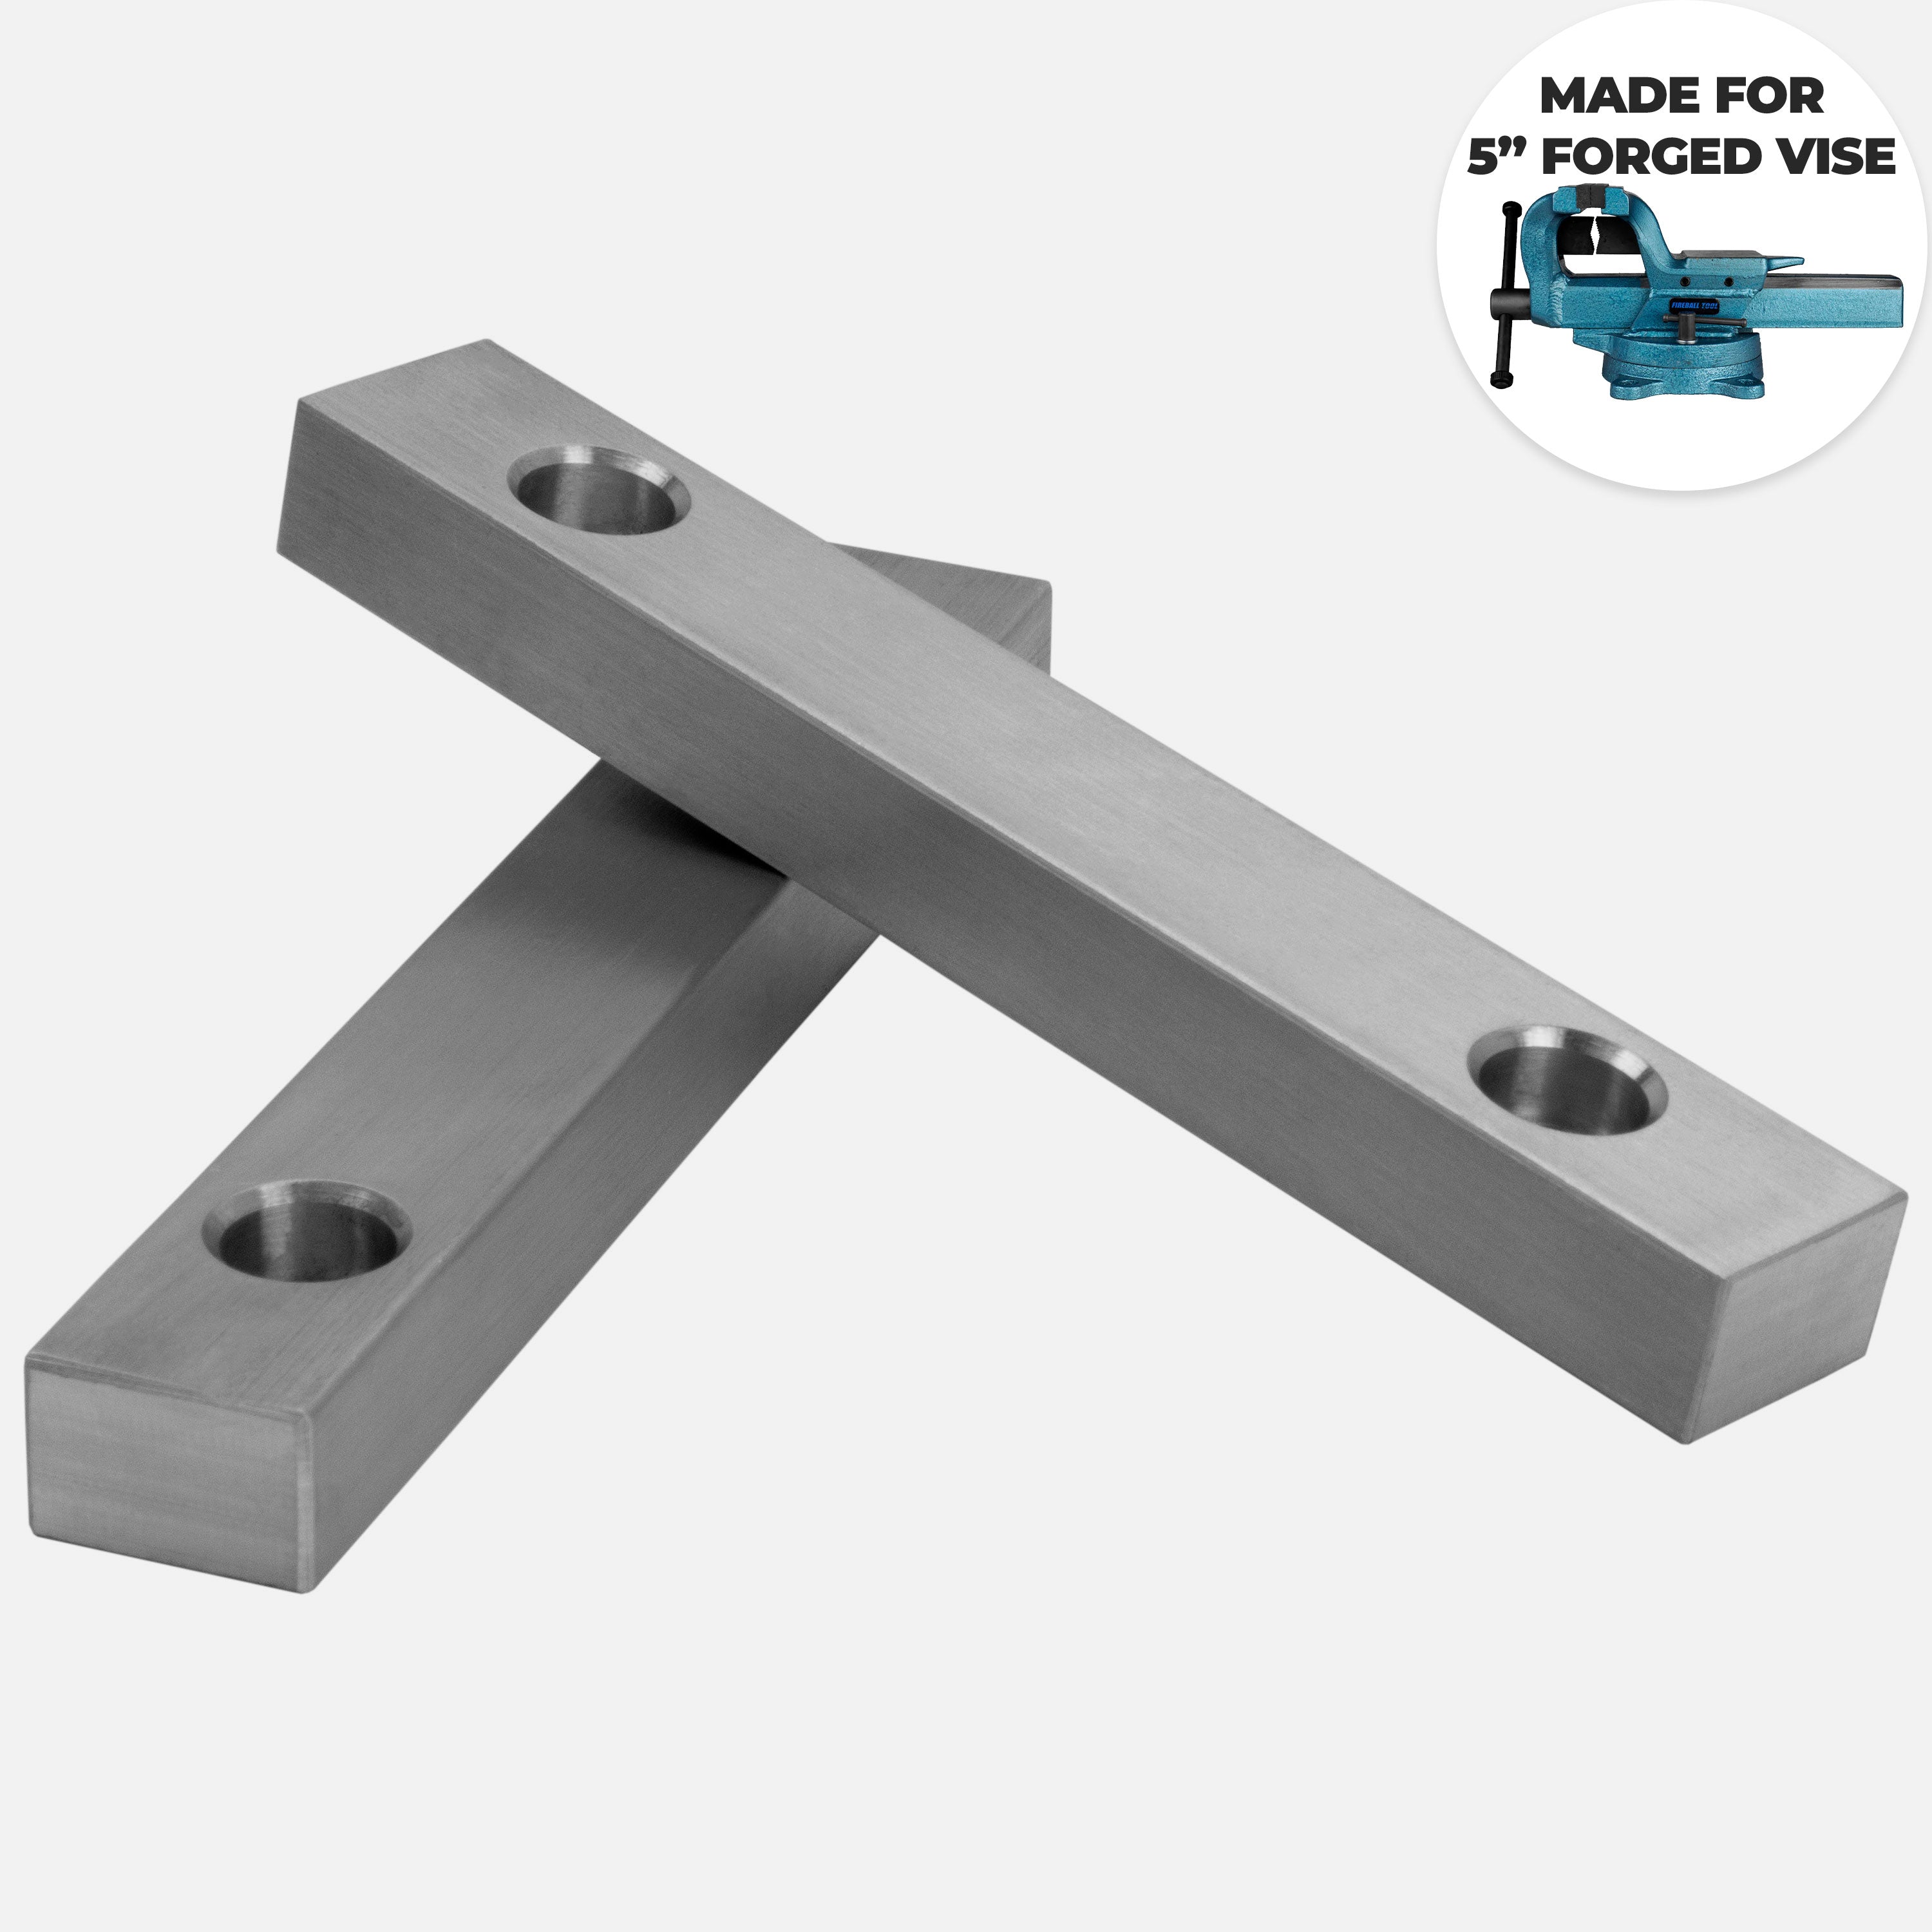 Aluminum Vise Jaws for Blue Forged Vise (Pair)